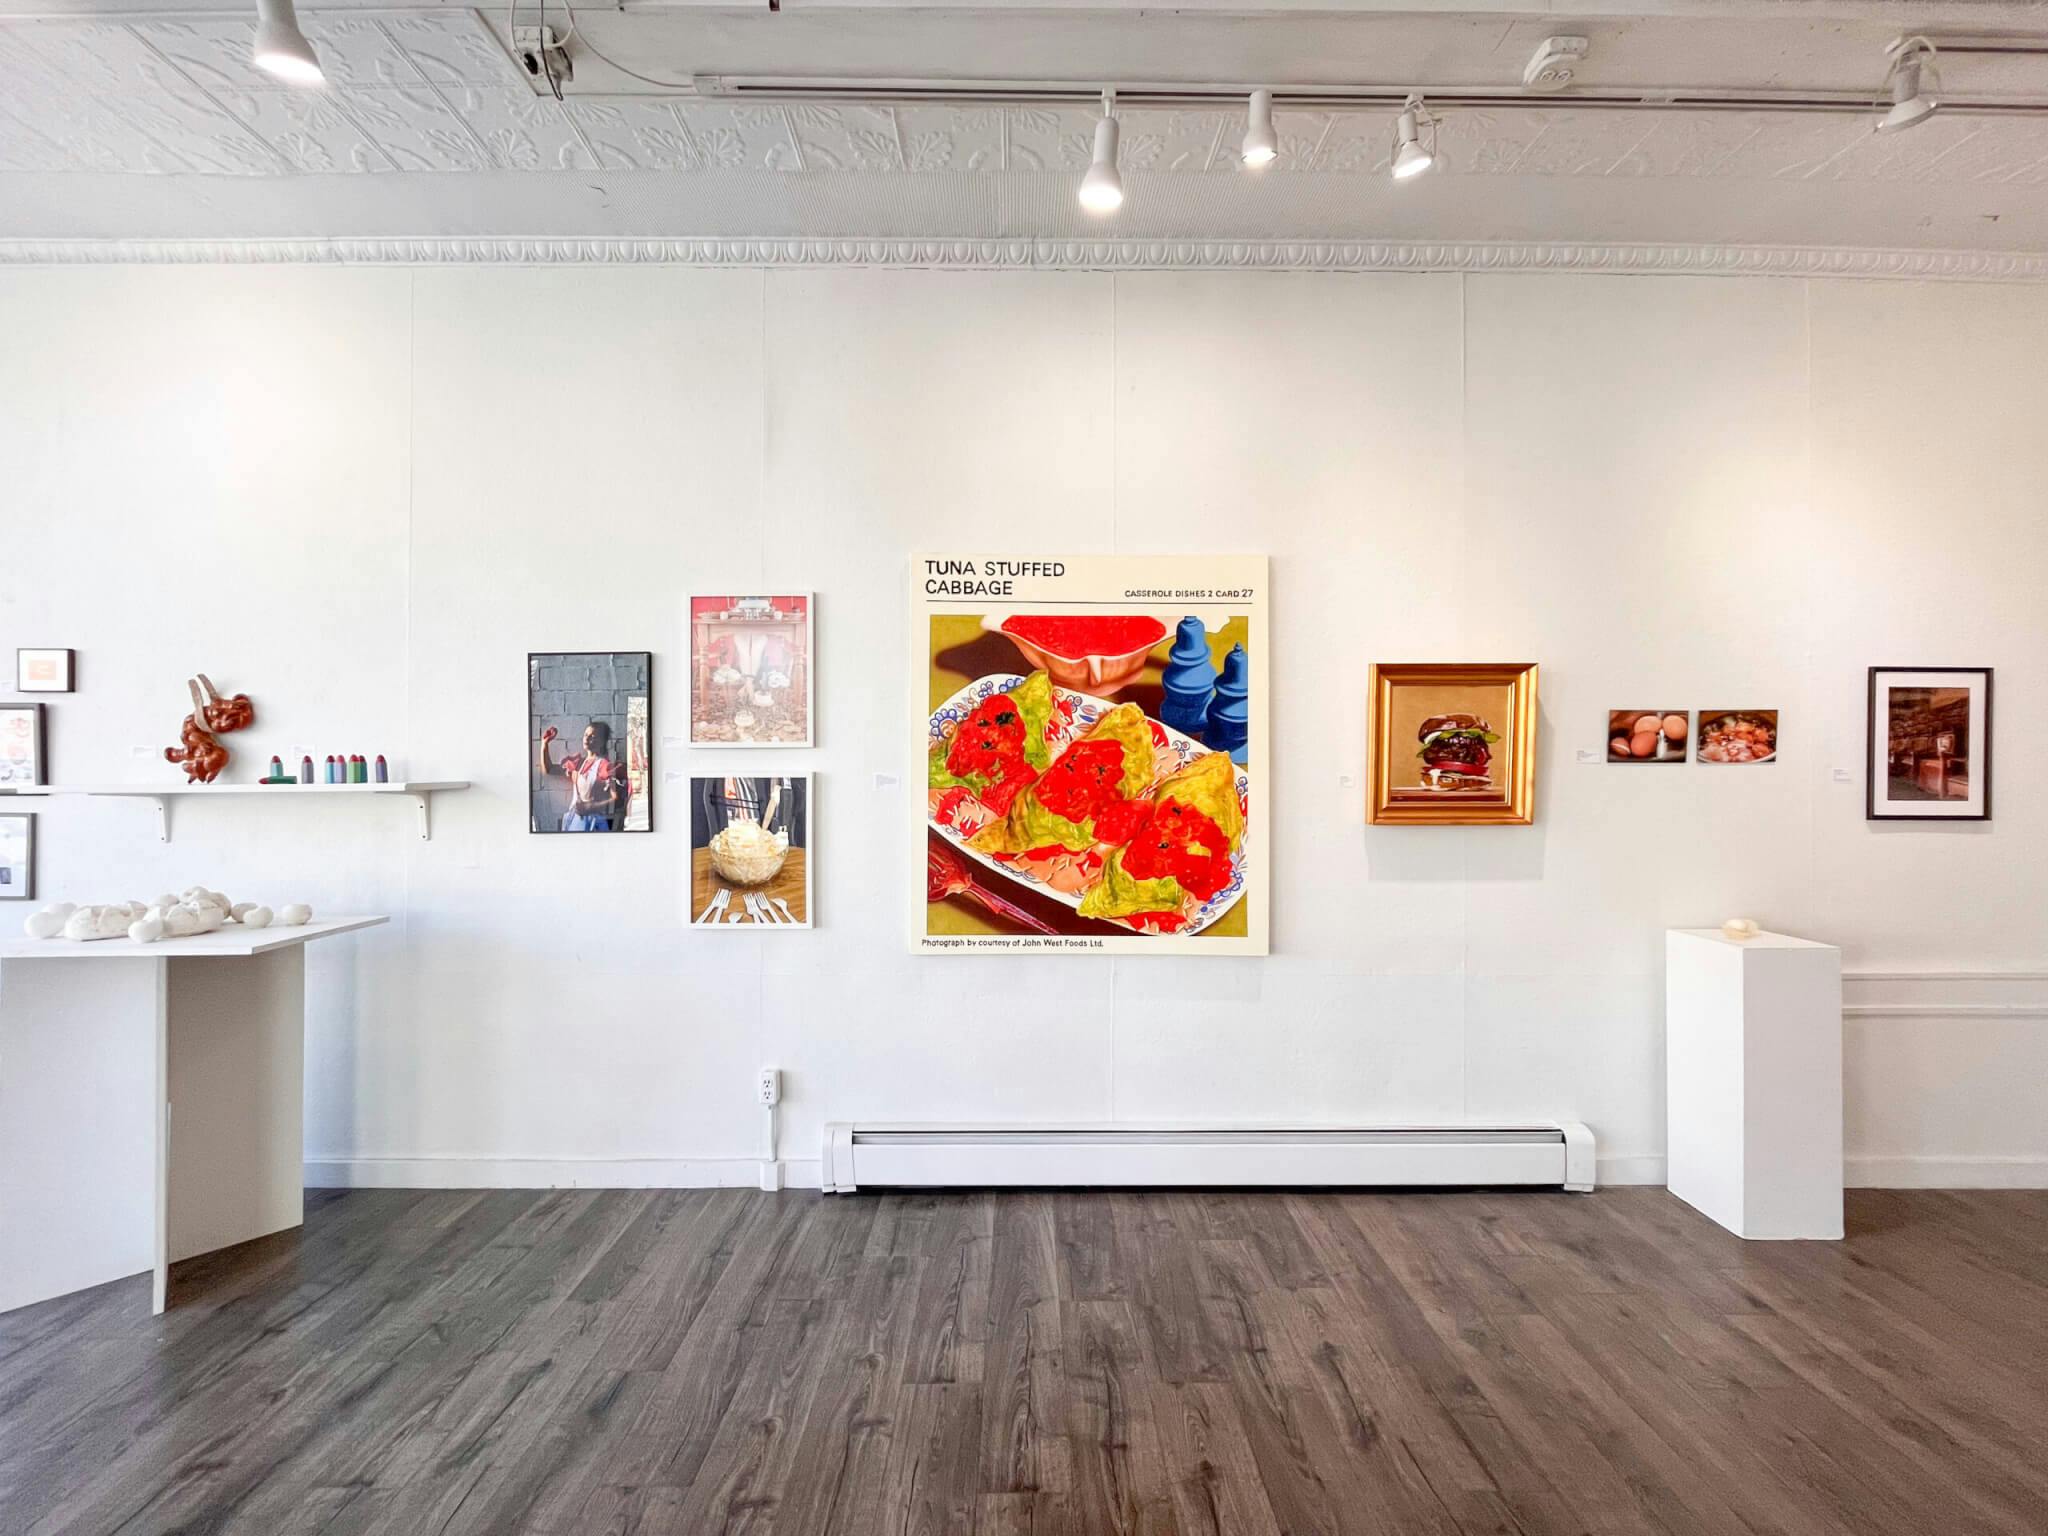 A set of artworks, the centerpiece featuring bright, bold colors, on display against a white wall at Gallery 263.